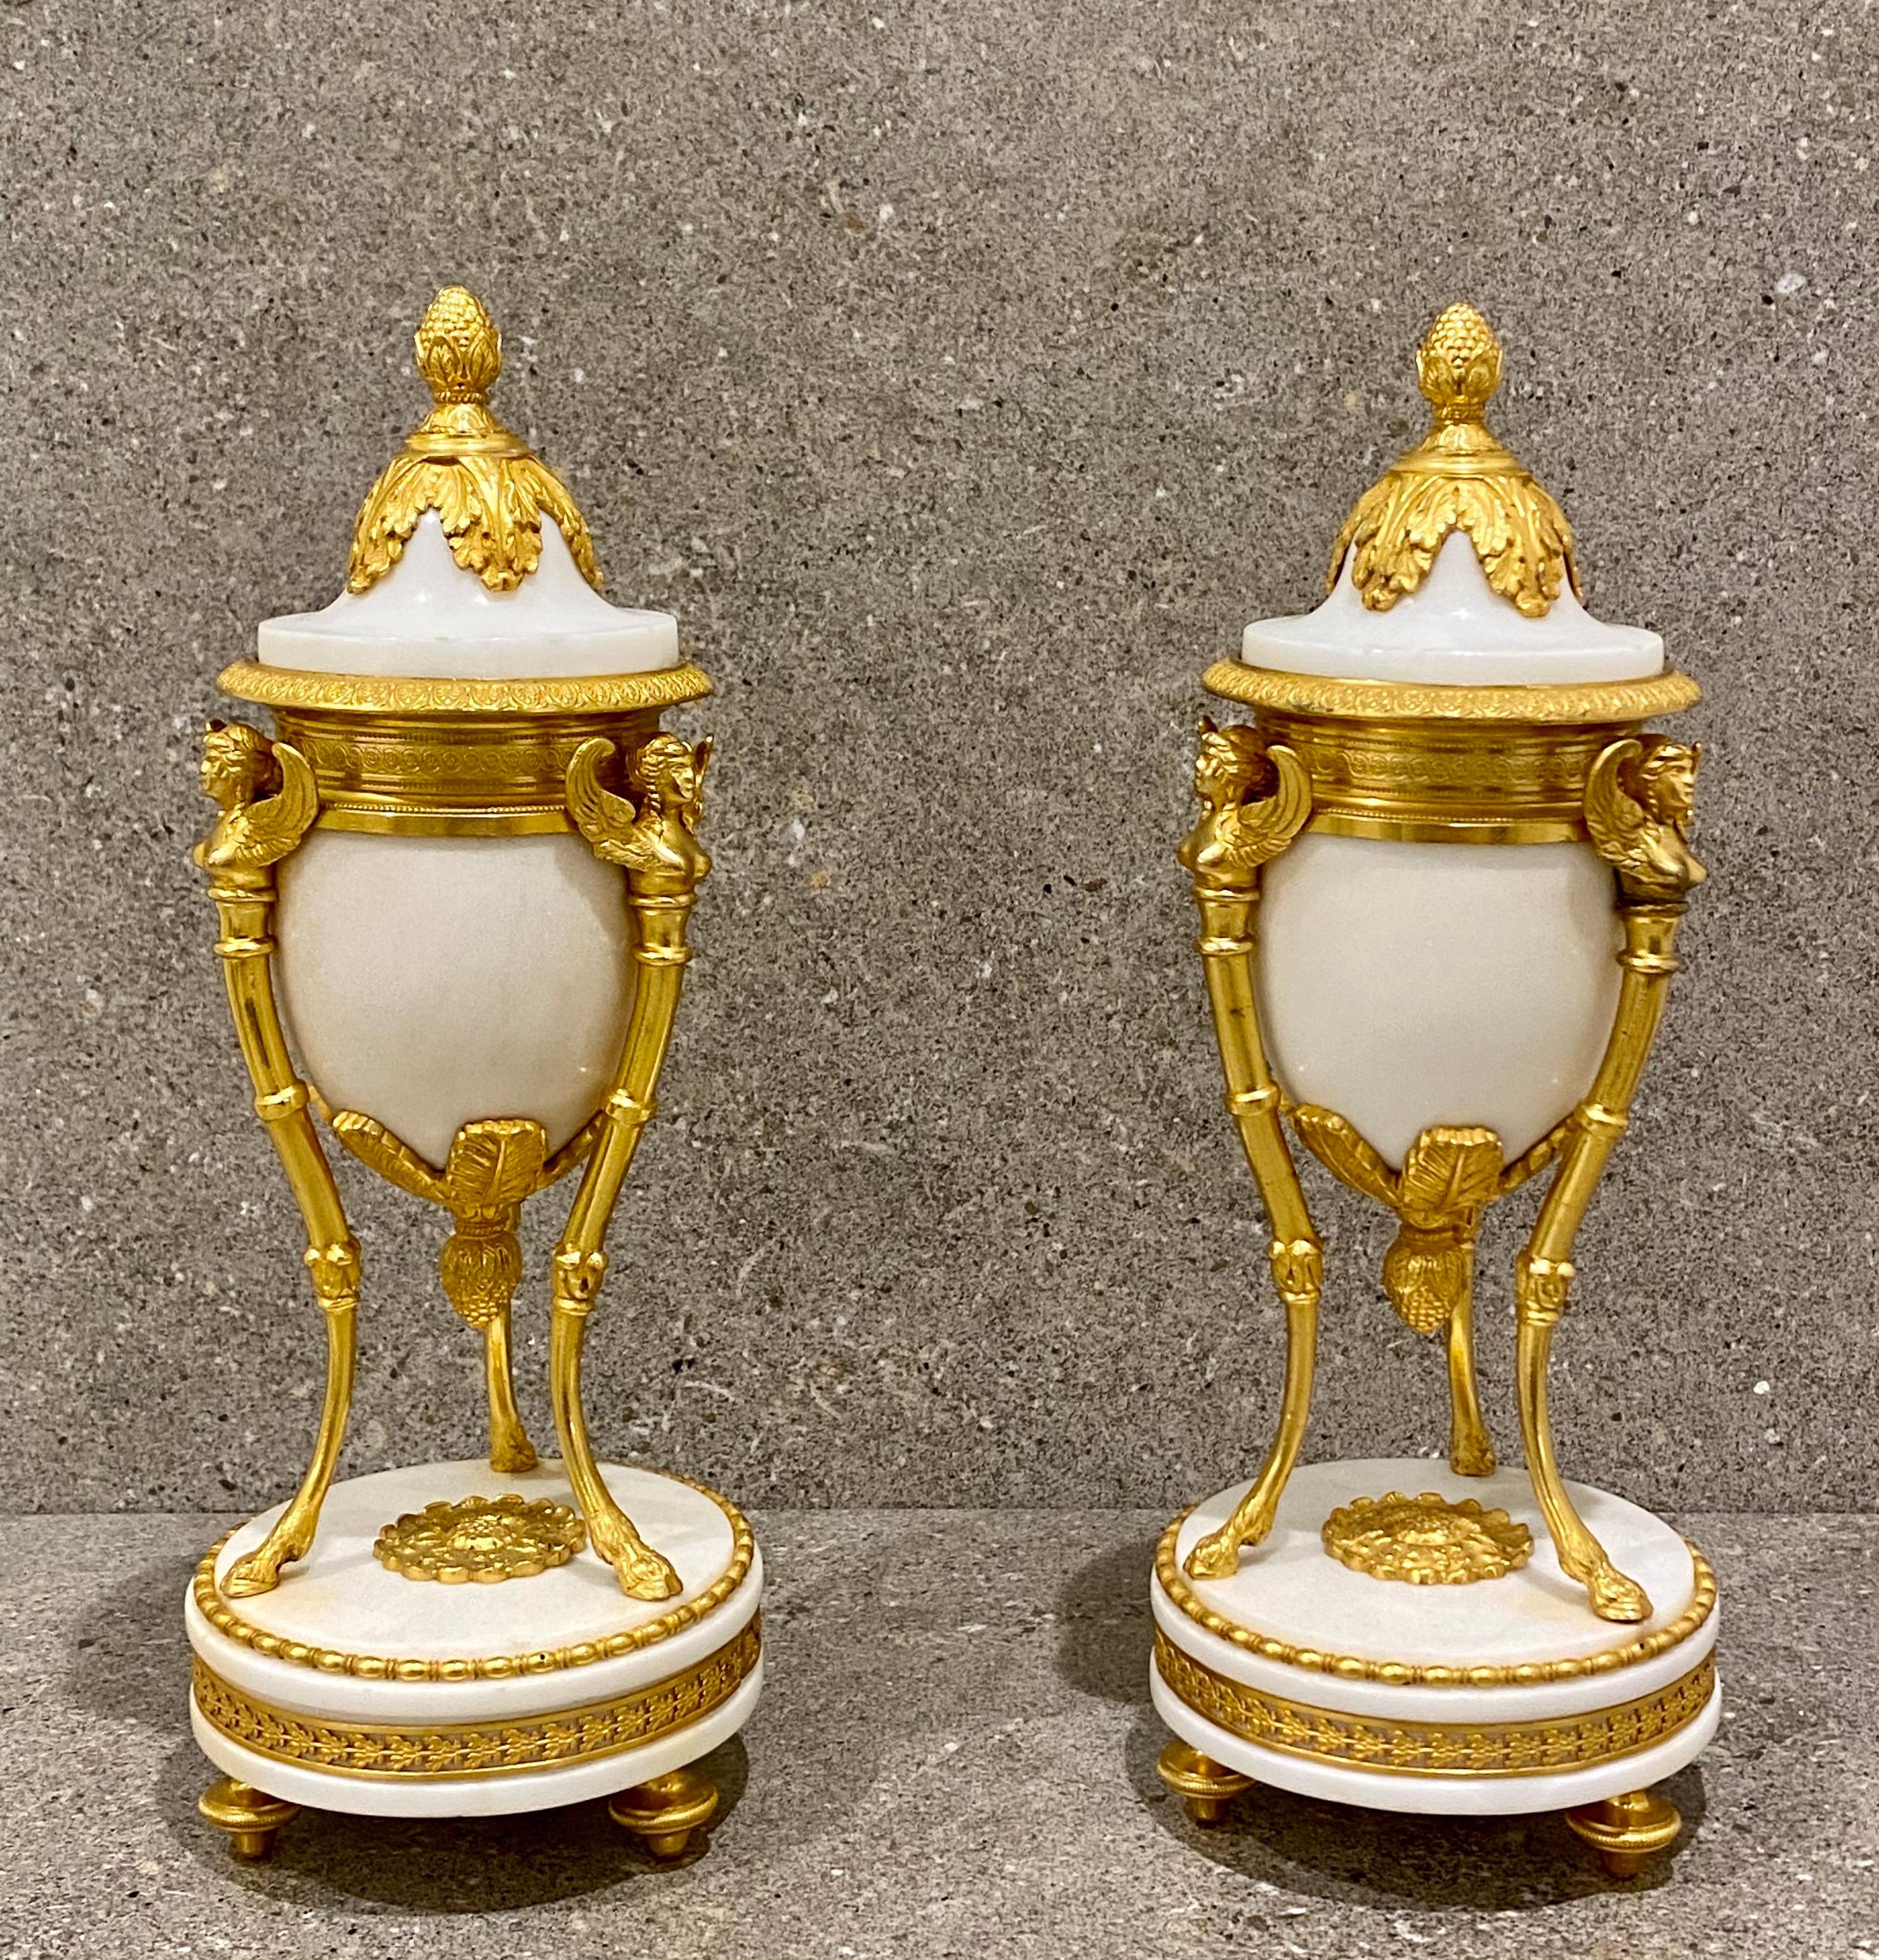 Rare Sphinx Cassolettes in white marble are very scarce and the best of this type. 
Each cassolette features three gilt bronze monopodia supports in the form of sphinxes. Each support is shaped like a winged female that stands on a single leg,